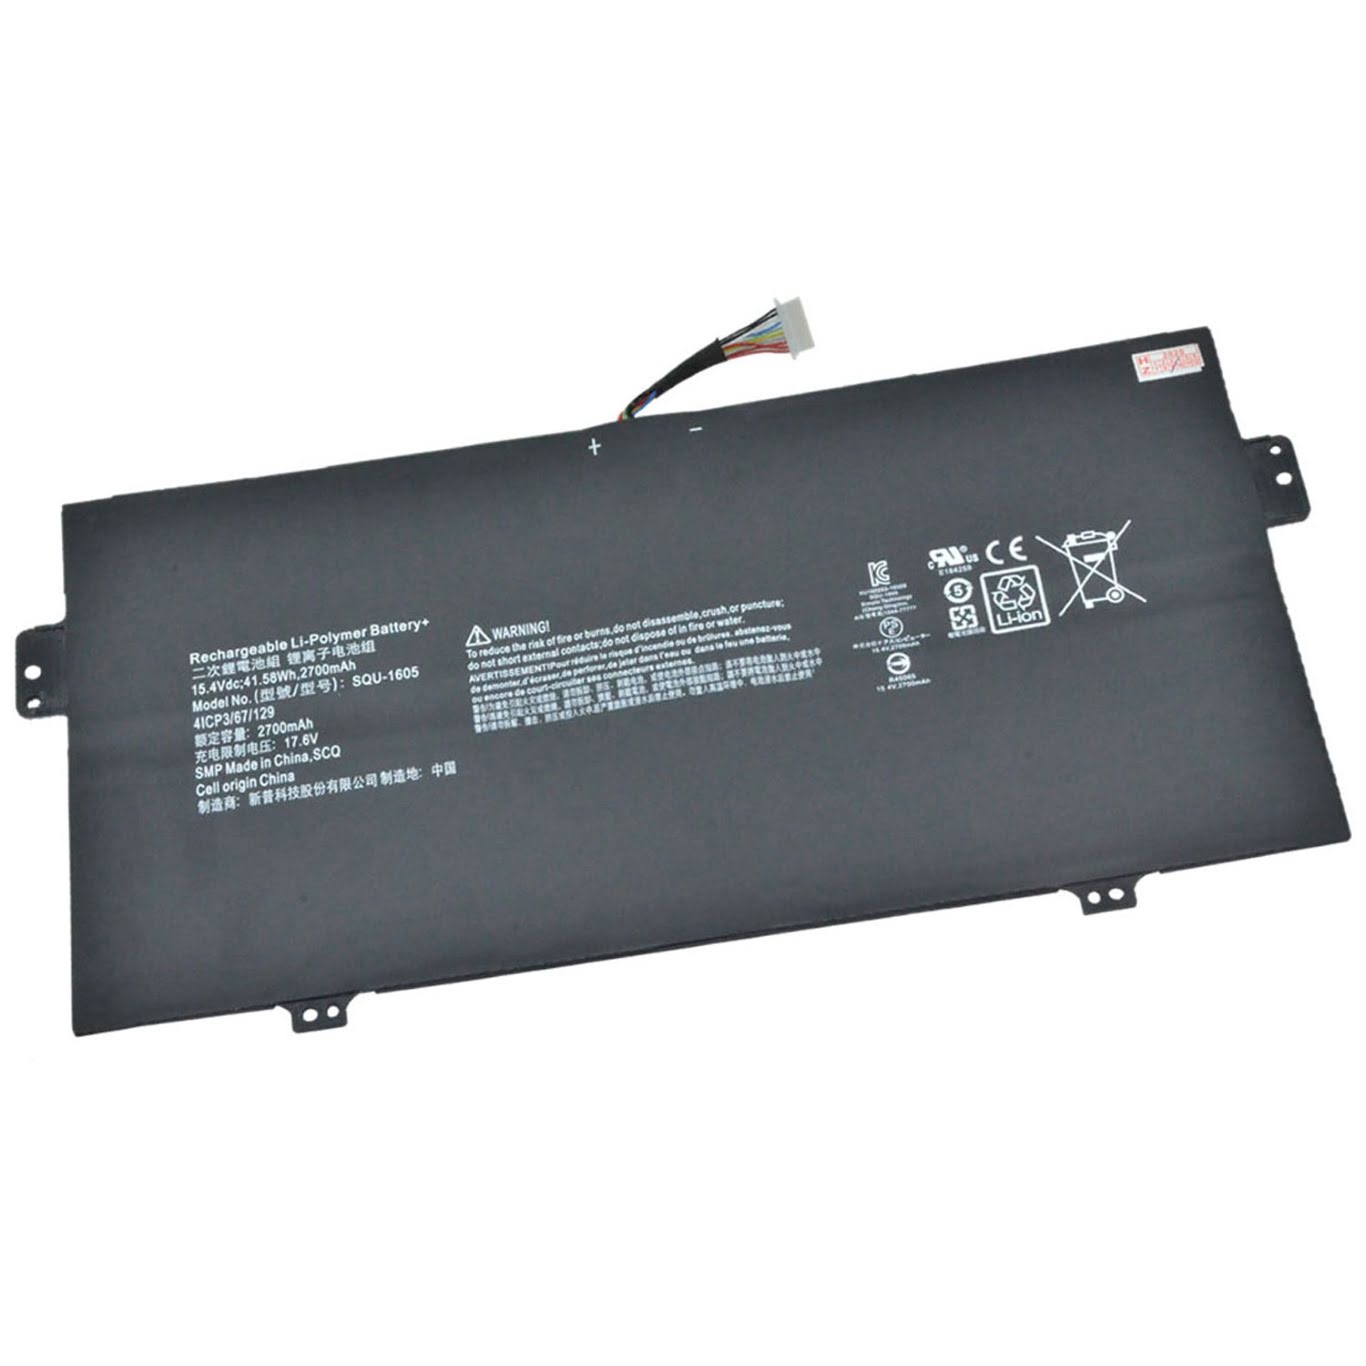 Acer 4icp3/67/129, Squ-1605 Laptop Battery For Sp714-51-m4w7, Spin 7 Sp714-51-m4w7 replacement